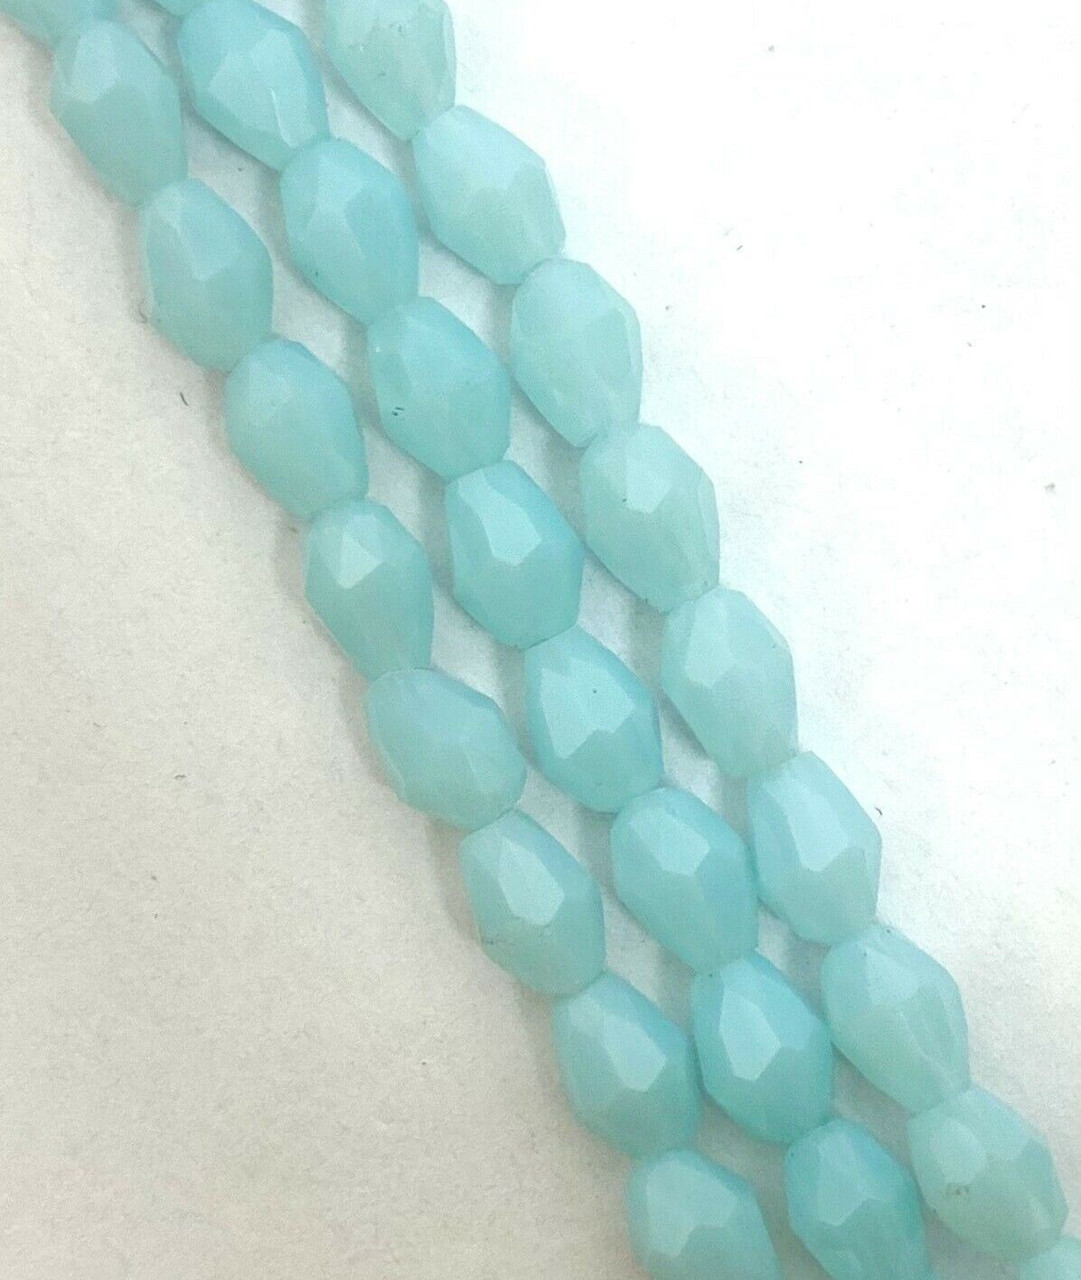 Strand of faceted drop glass beads (briolettes) - approx 6x4mm, Pale Aqua Translucent, approx 72 beads